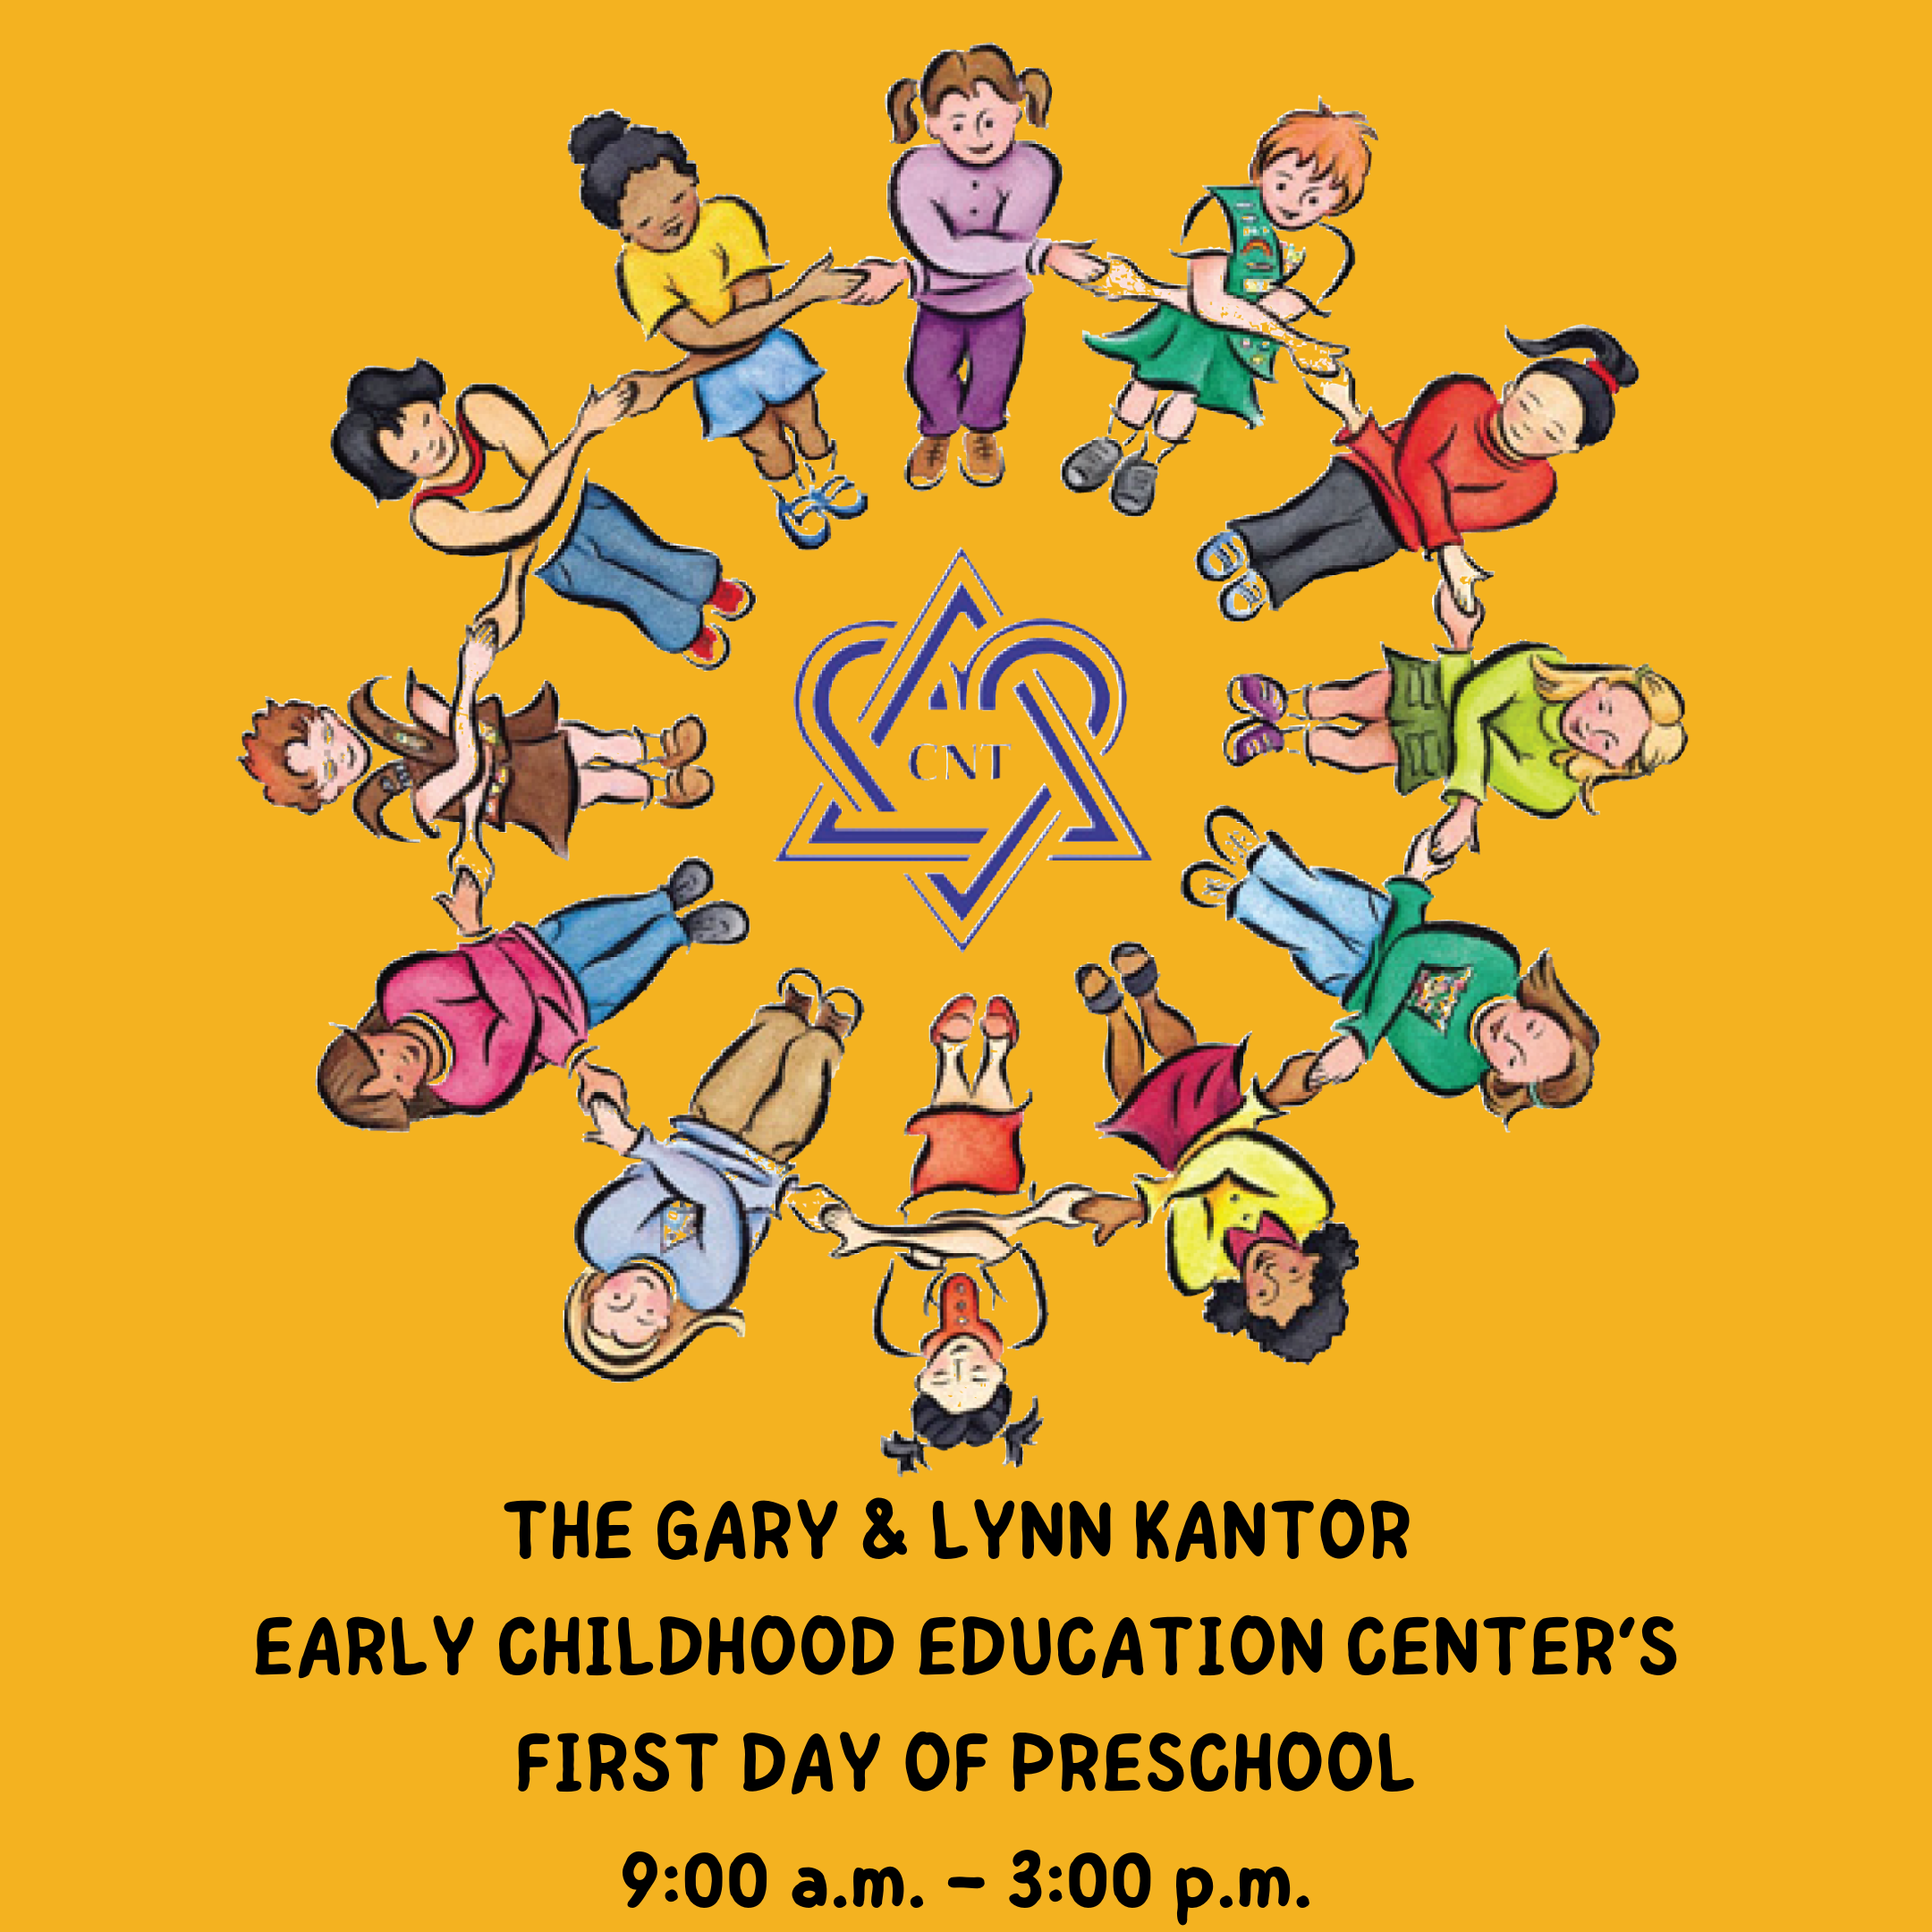 THE GARY & LYNN KANTOR EARLY CHILDHOOD EDUCATION CENTER’S FIRST DAY OF PRESCHOOL